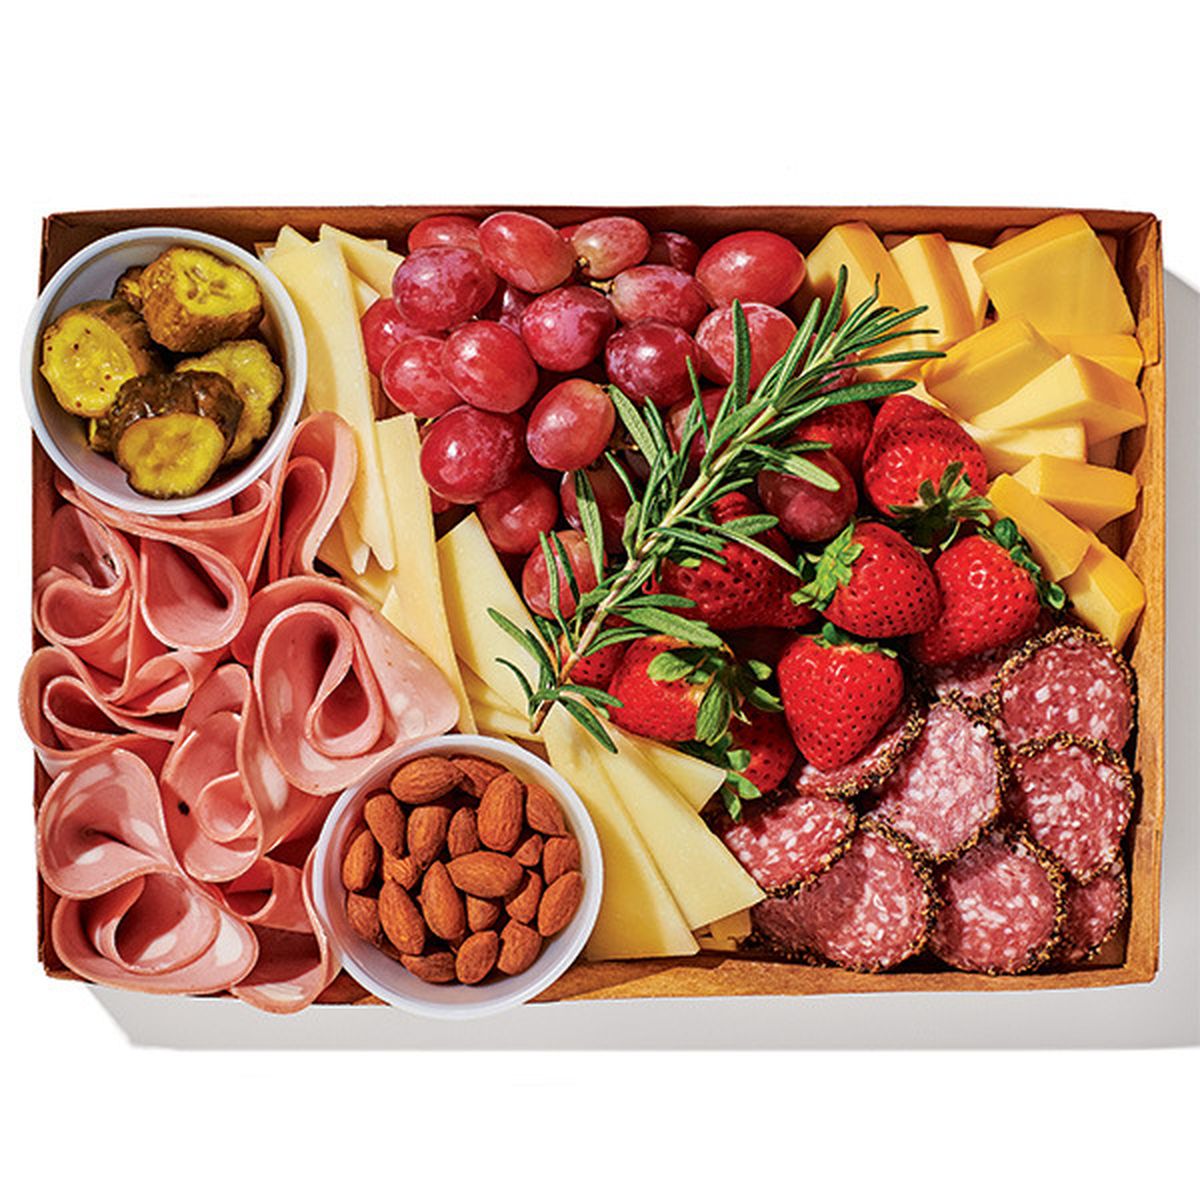 Boar's Head Build Your Own Charcuterie Box (each) Delivery or Pickup ...